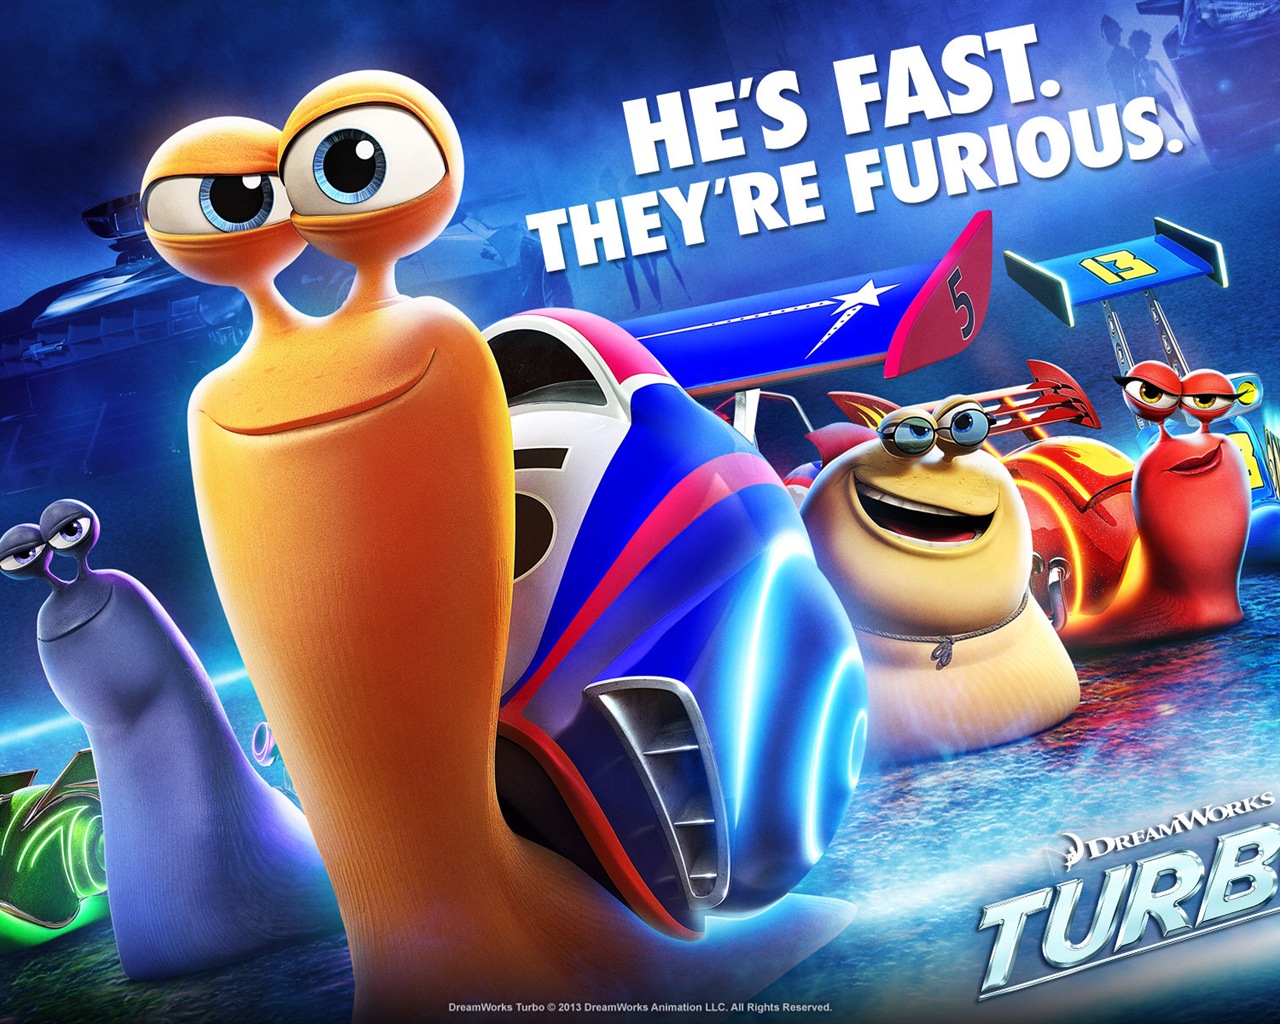 Turbo 3D movie HD wallpapers #6 - 1280x1024